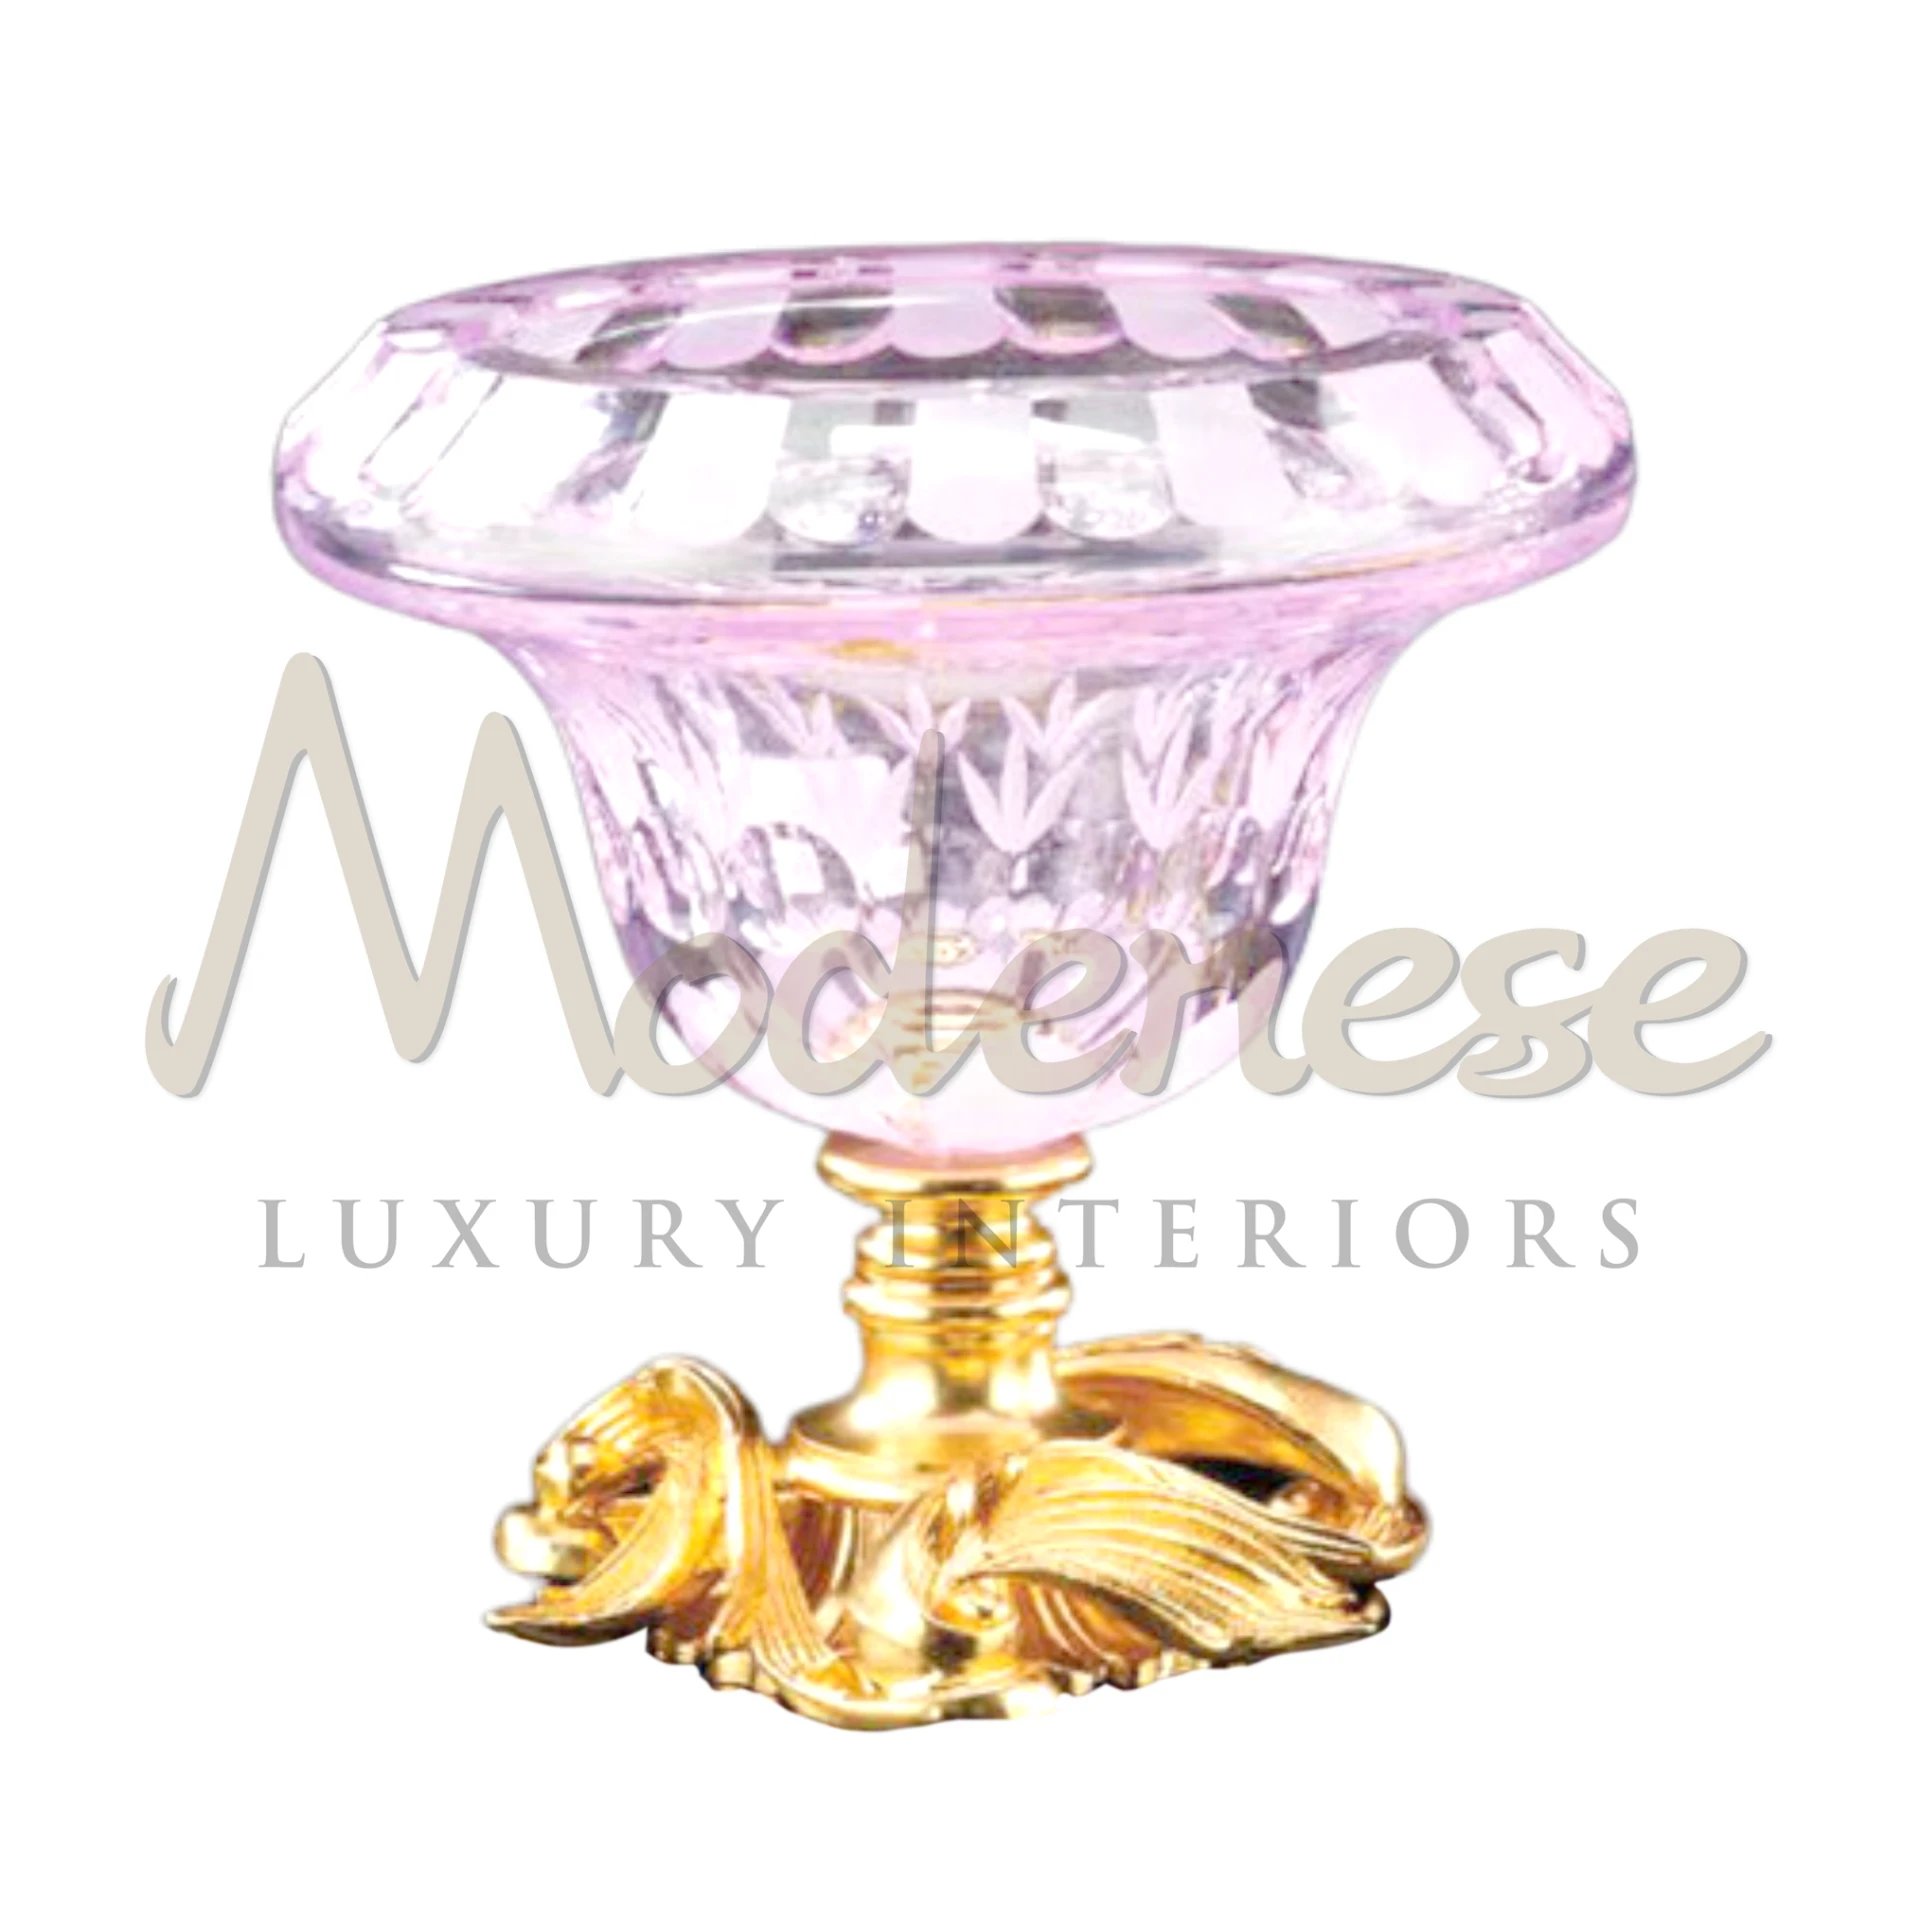 Gorgeous Pink Vase in various shapes, a stunning glass decor piece that adds a touch of elegance and style to luxury and classic interior designs.